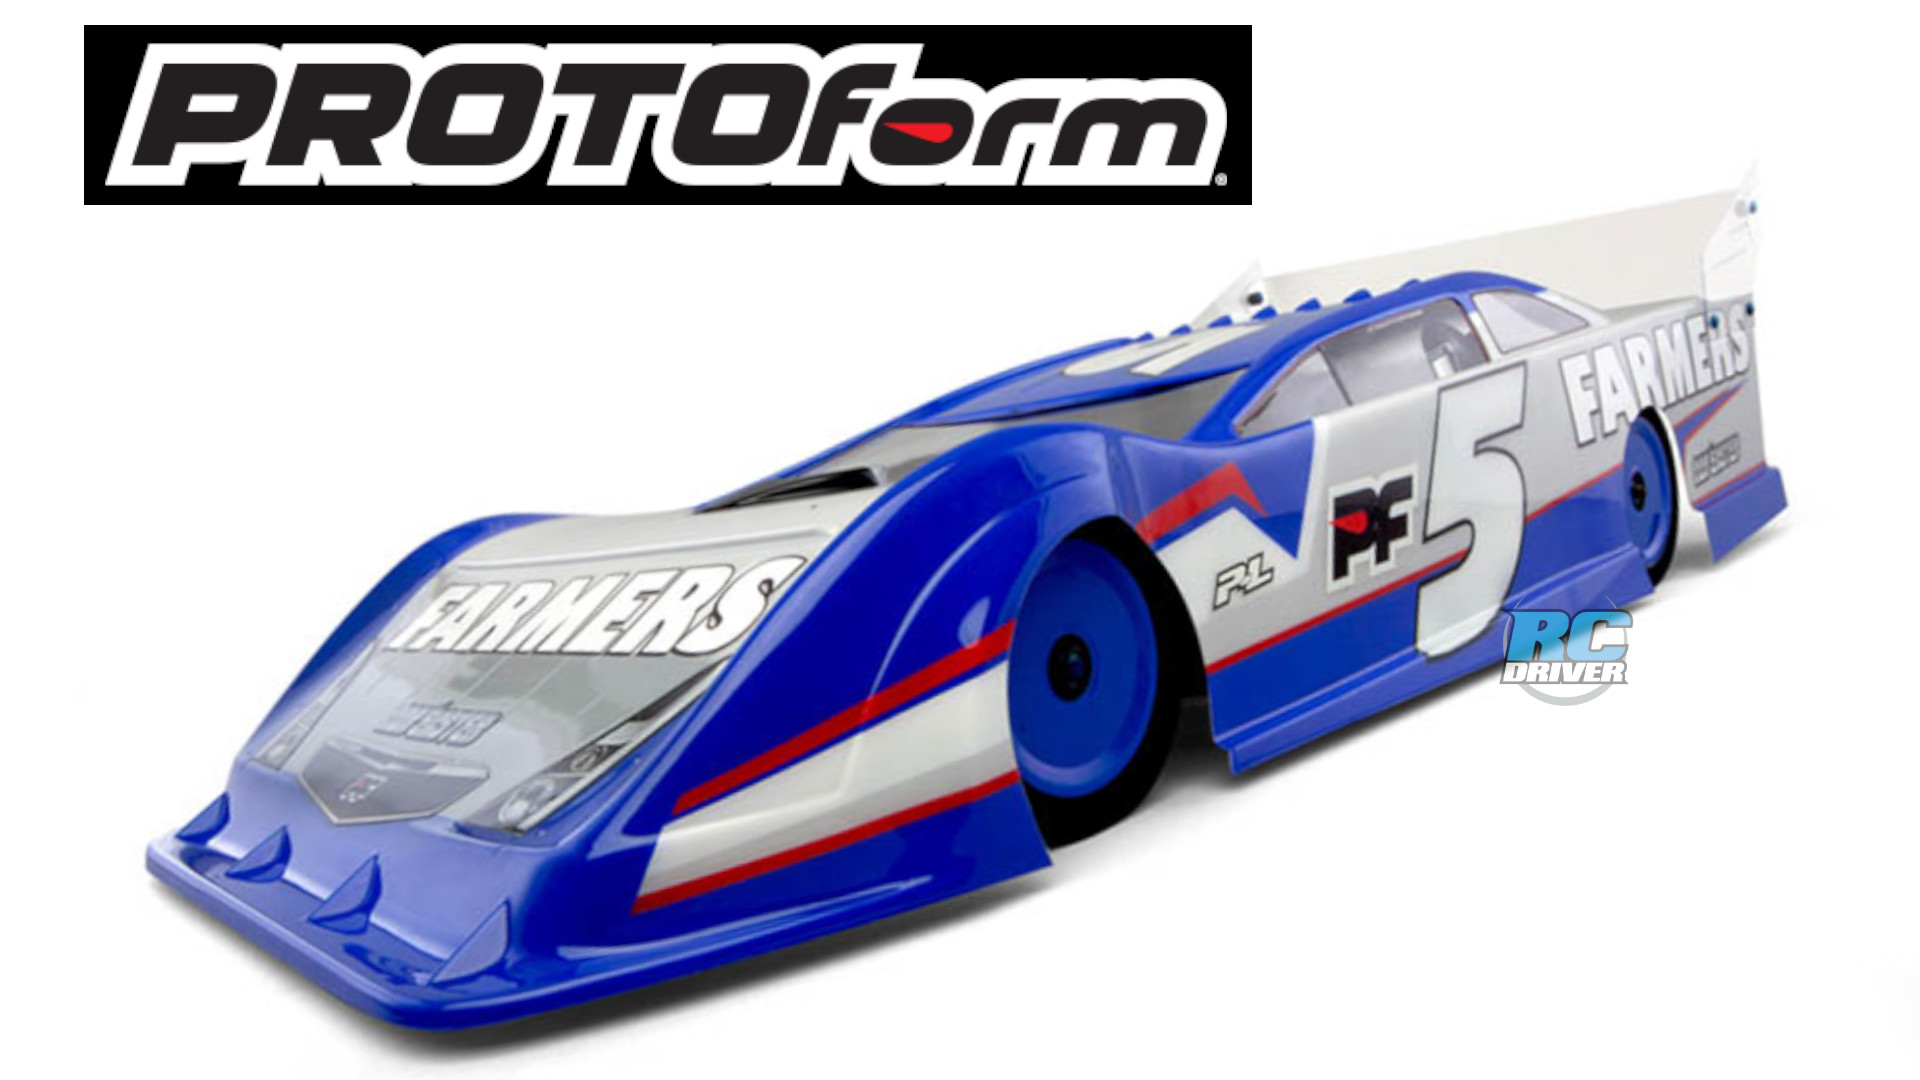 PROTOform oval bodies to achieve on-track success